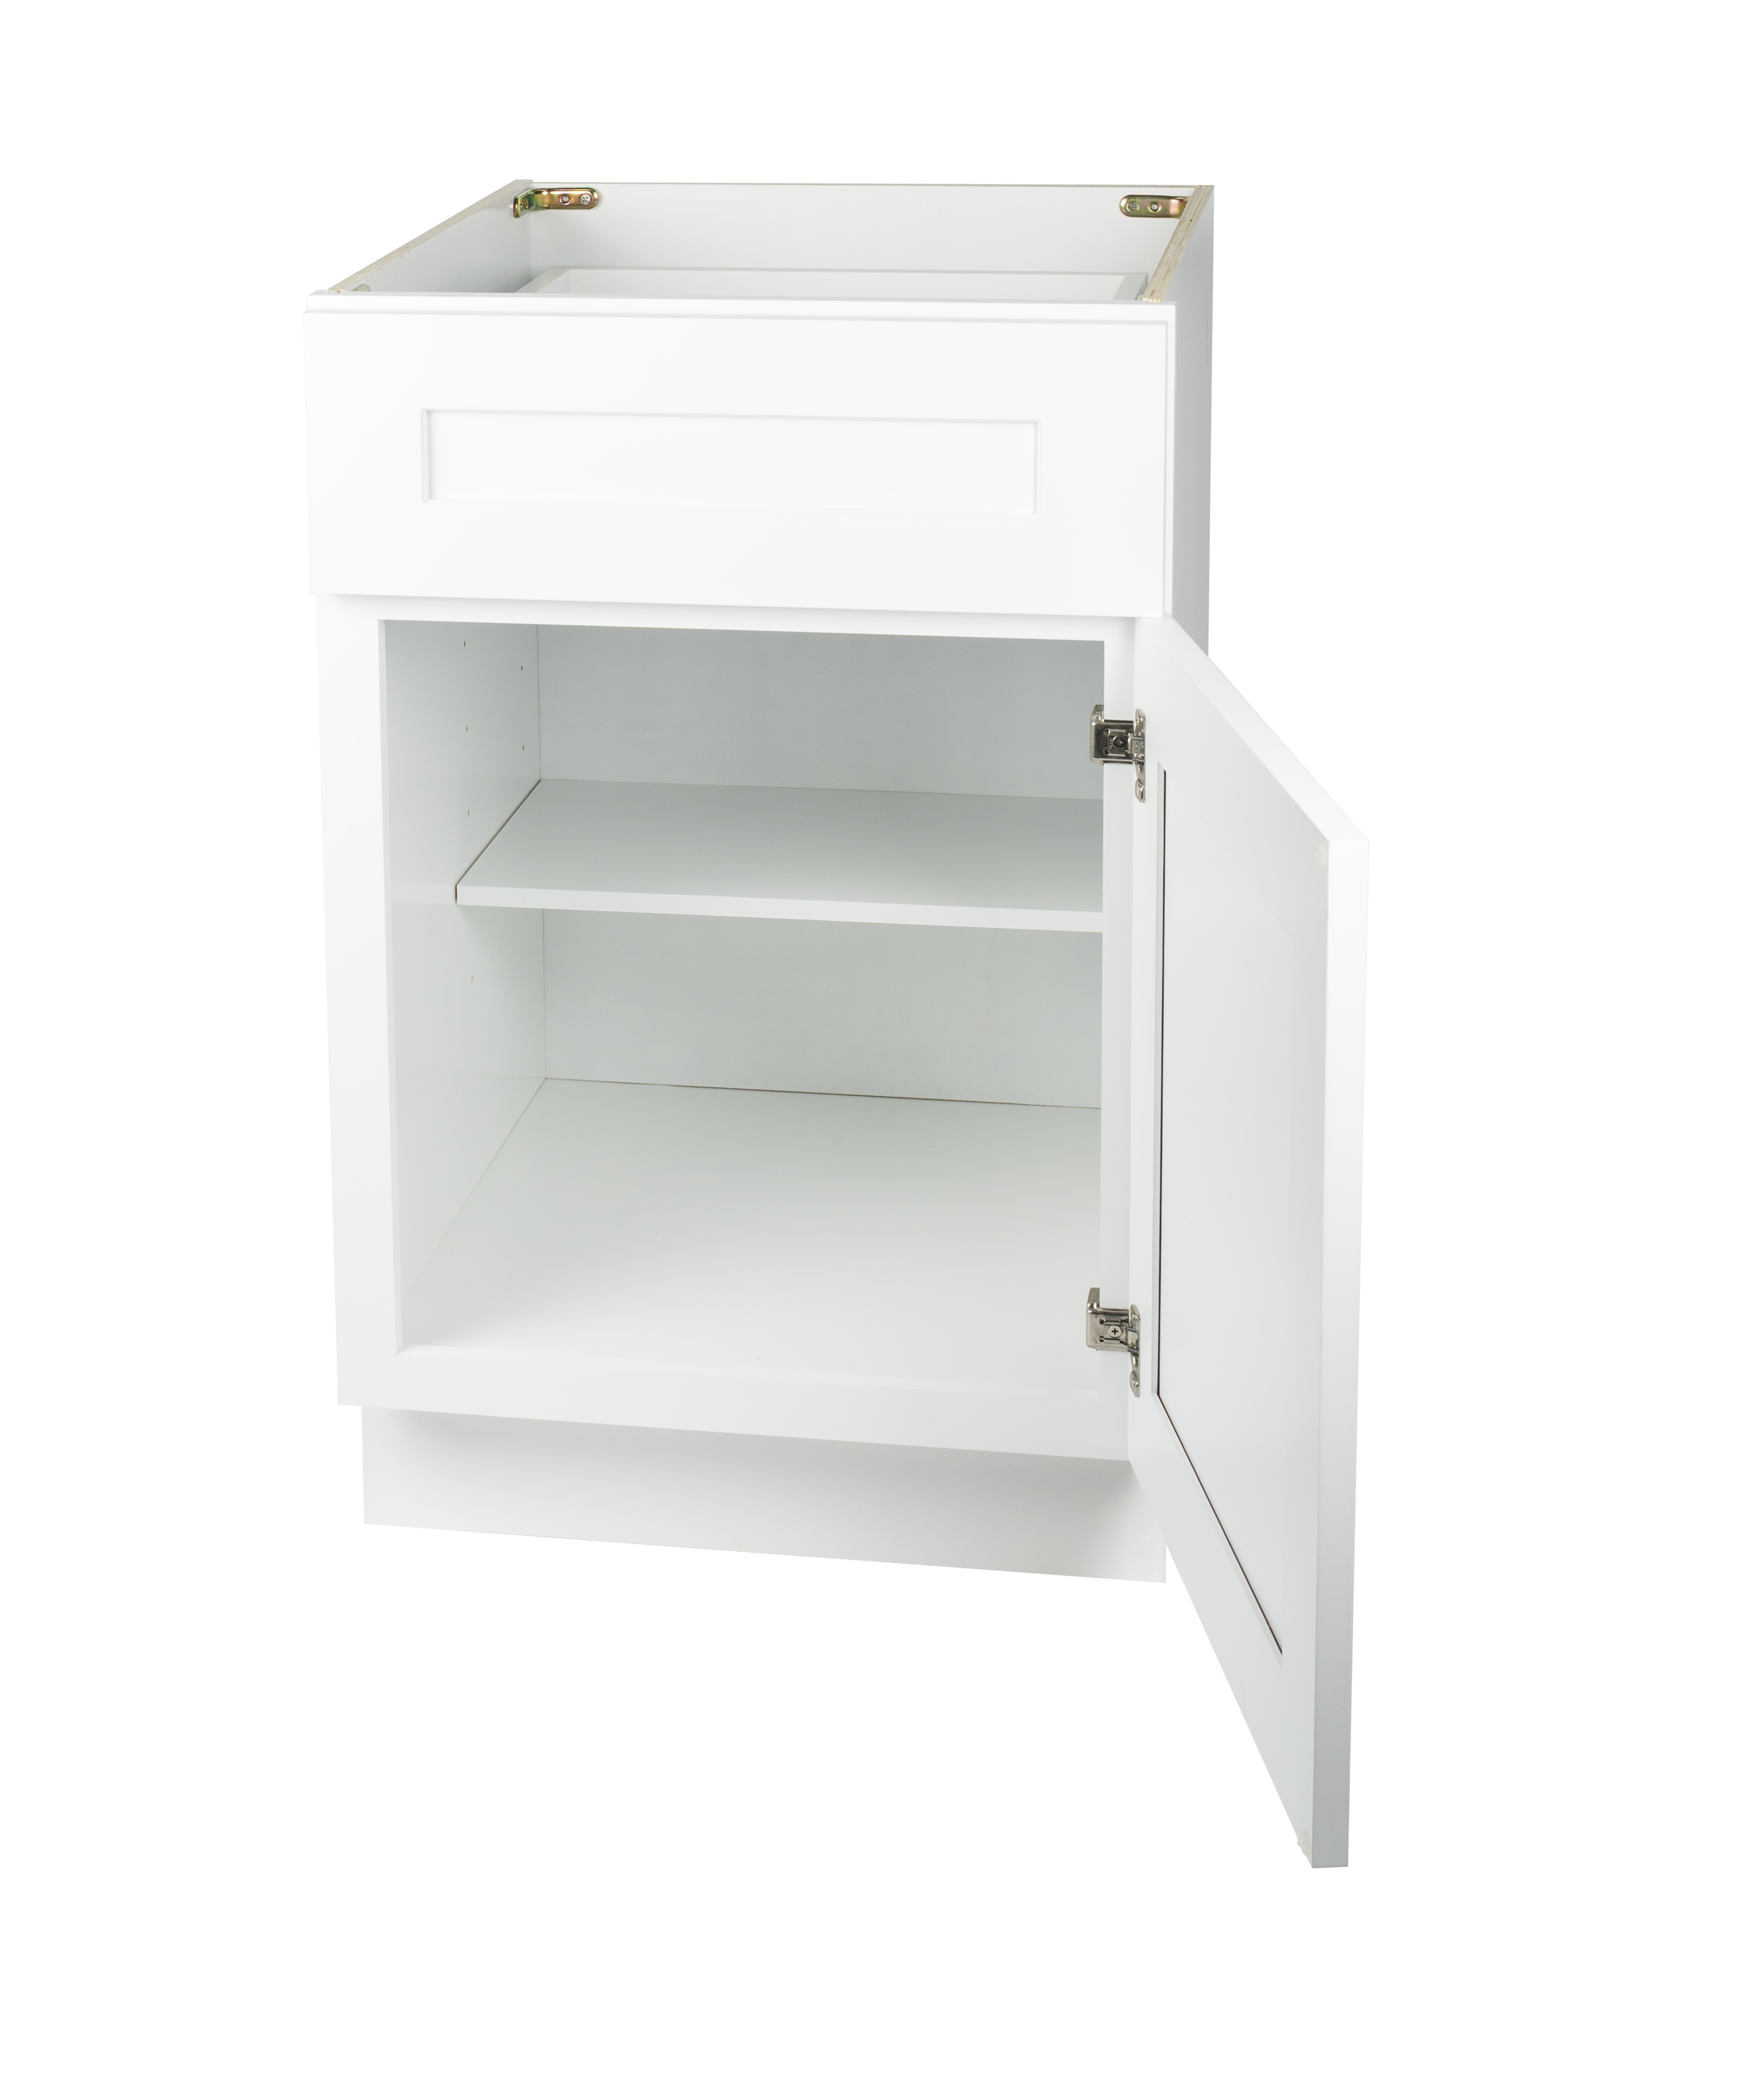 Ready to Assemble 12Wx34.5Hx24D in. Shaker Base Cabinet with 1 Door and 1 Drawer in White